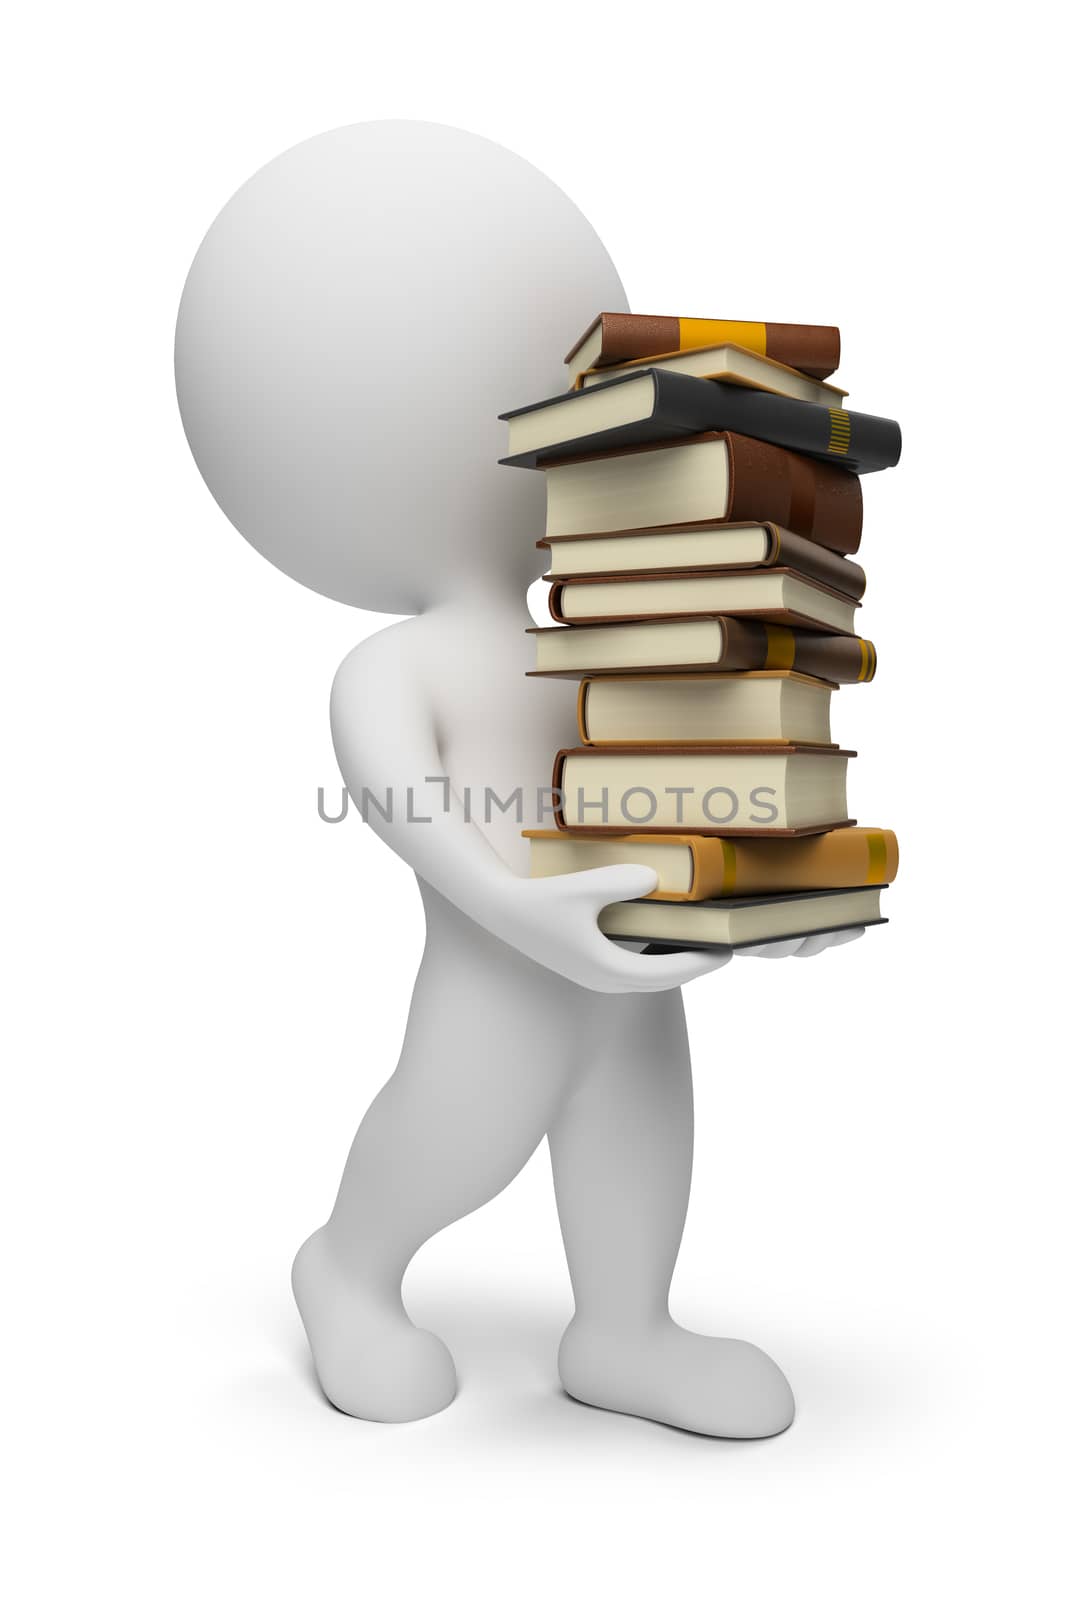 3d small people carrying books. 3d image. Isolated white background.